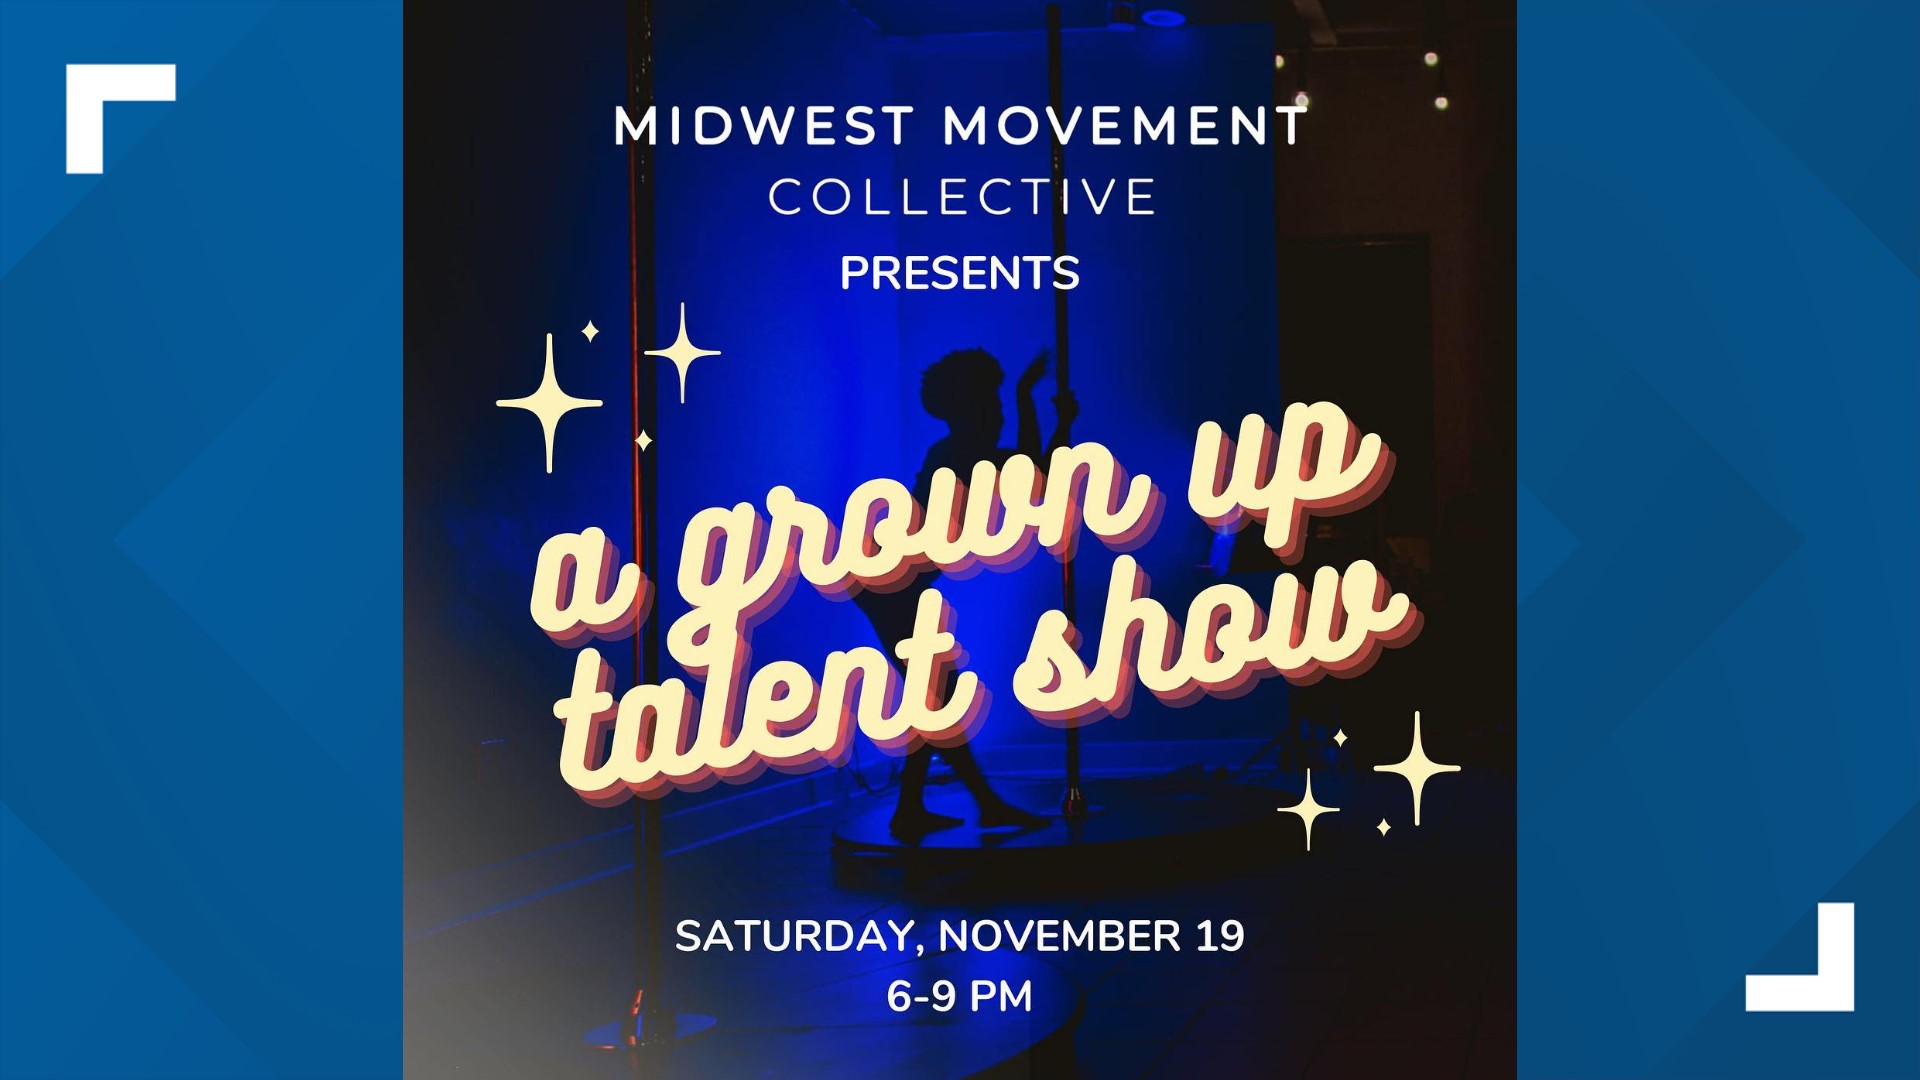 Midwest Movement Collective in Grand Rapids is hosting a unique talent show this weekend, promoting inclusivity and diversity.